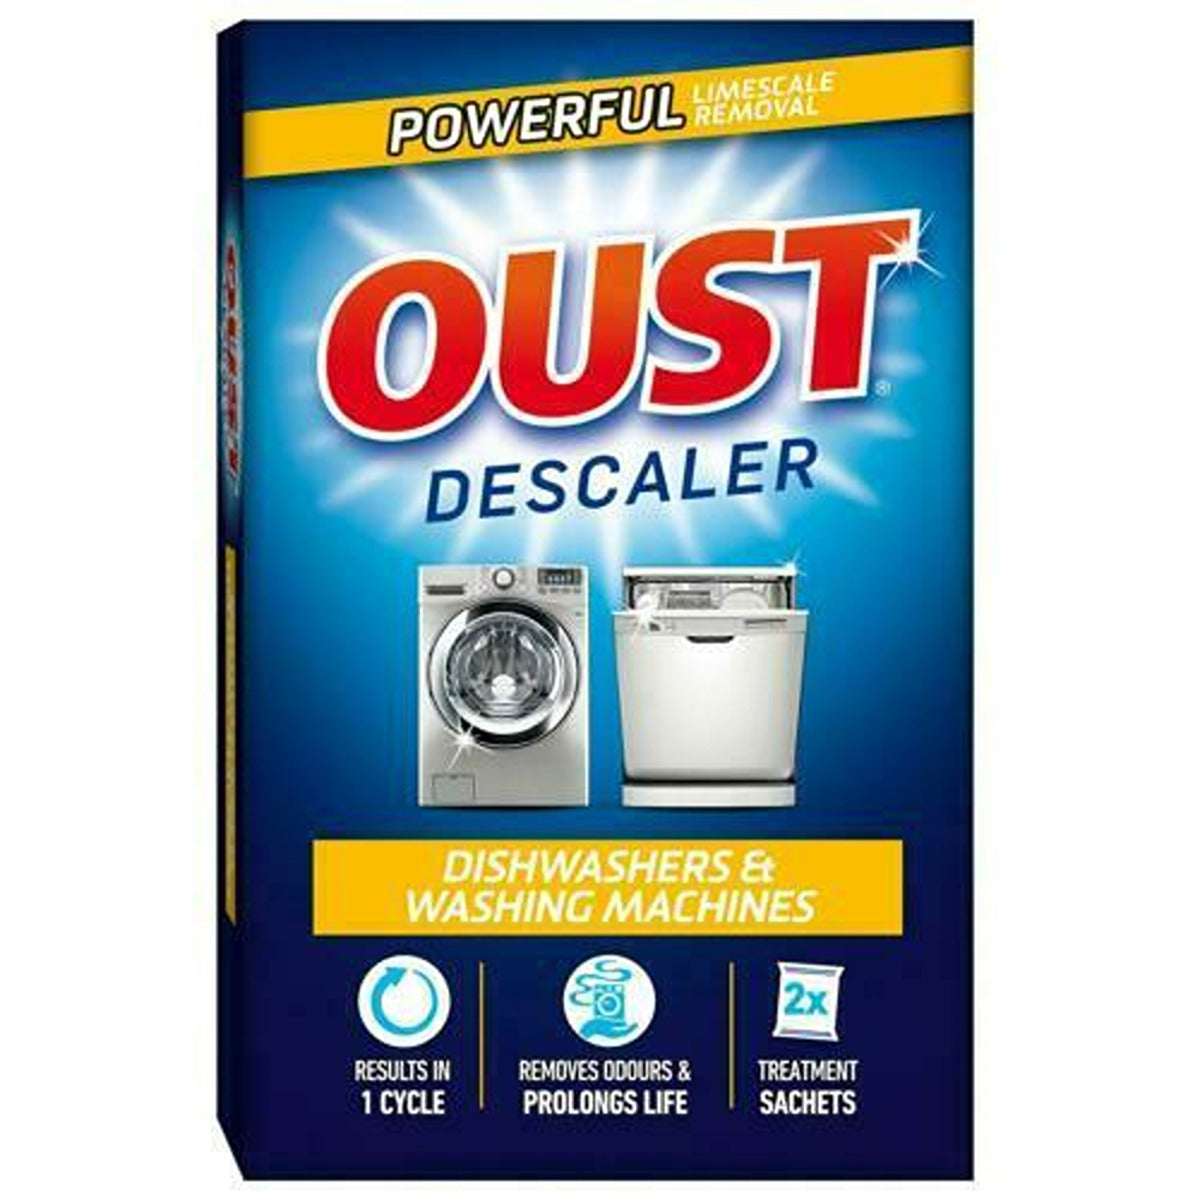 Oust - Dishwashers & Washing Machines Descaler 2 x 75g - Continental Food Store